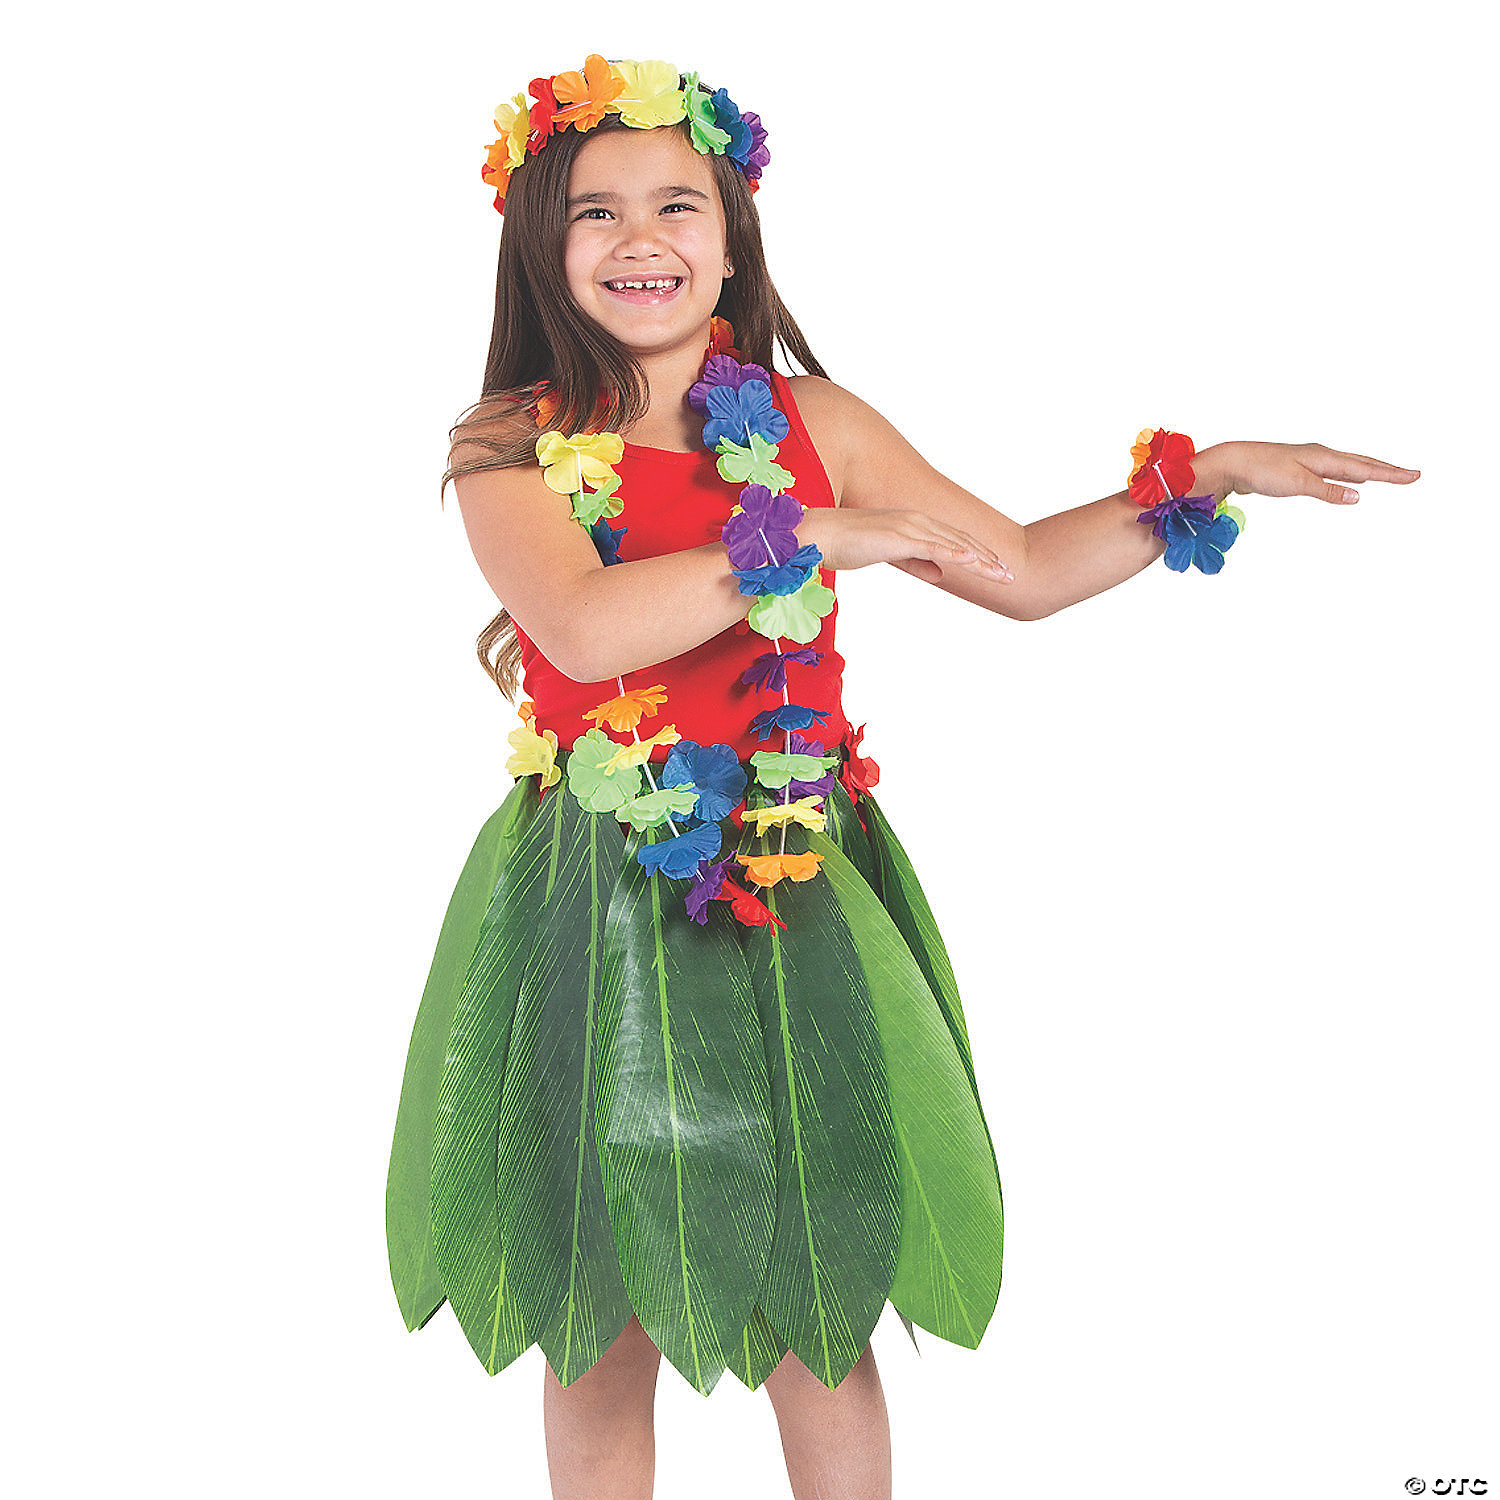 12 Set Luau Skirt Hawaiian Hula Grass Skirt with Flower Leis Necklace Set Luau Party Favors Hawaiian Tropical Party Decorations for Kids and Adults